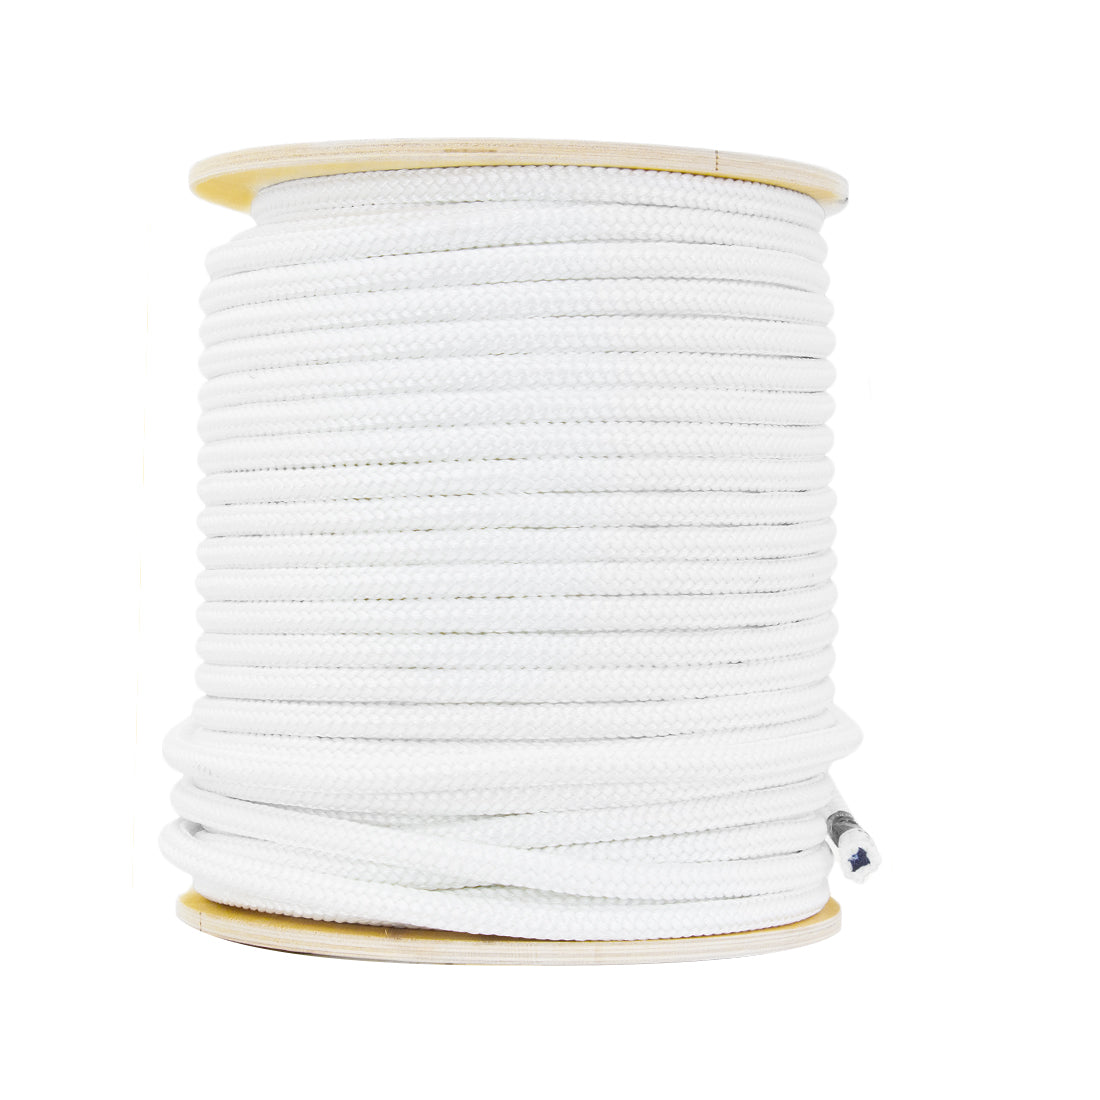 New England Rope Braided Safety Core - 1/2 Inch, Ropes